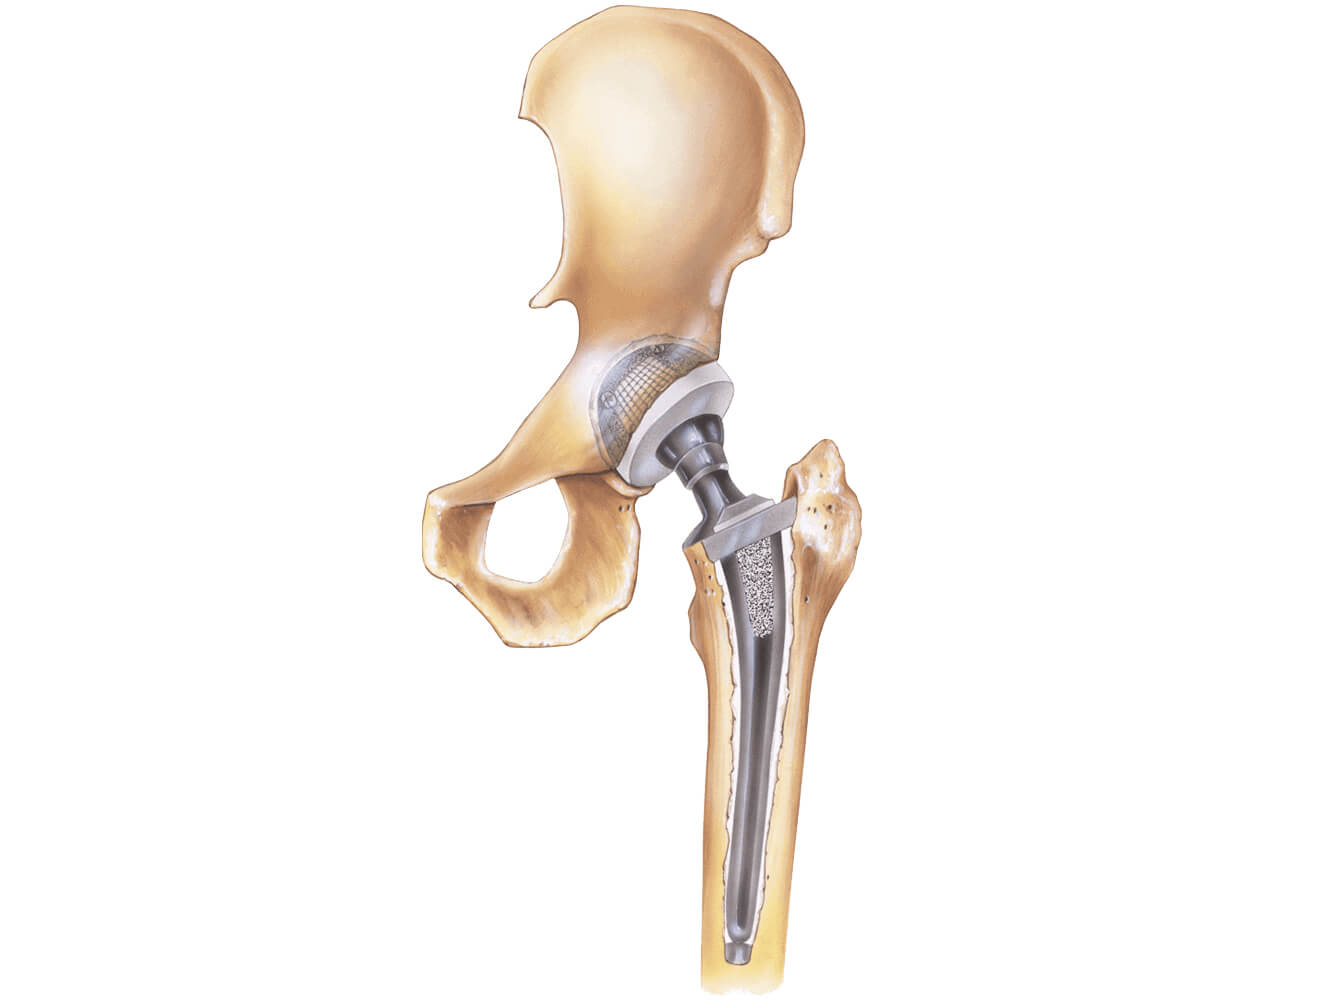 Hip Replacement | Procedure, Symptoms, Types of Implants and Risks